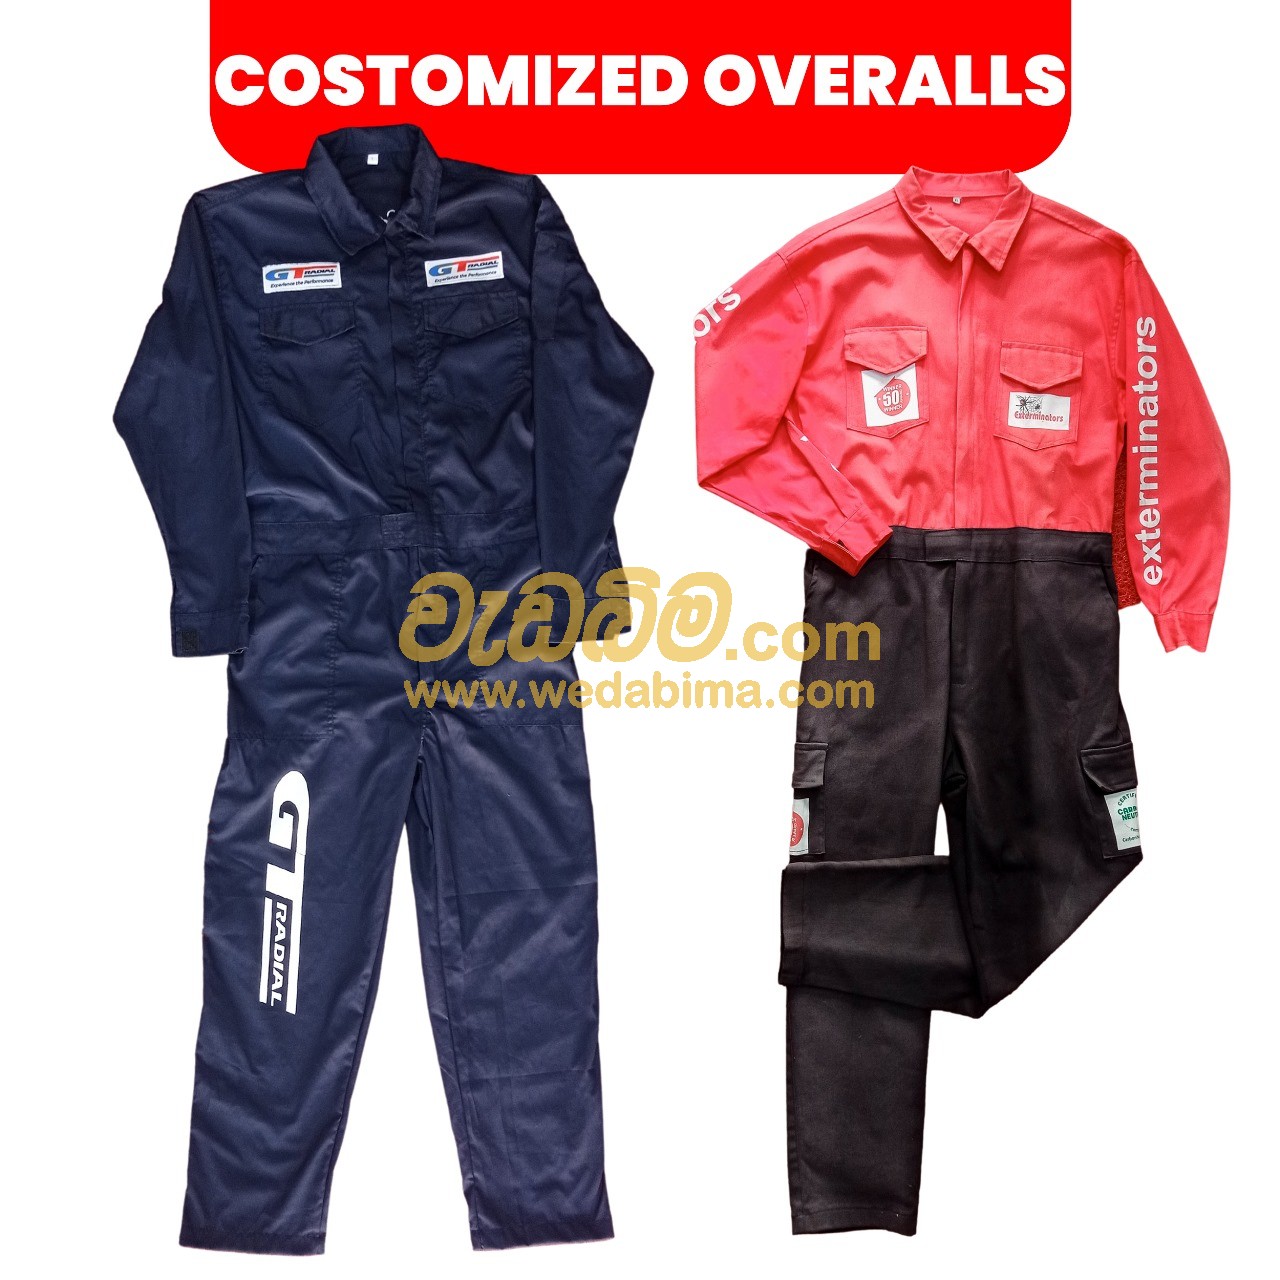 Overall Uniforms for Men